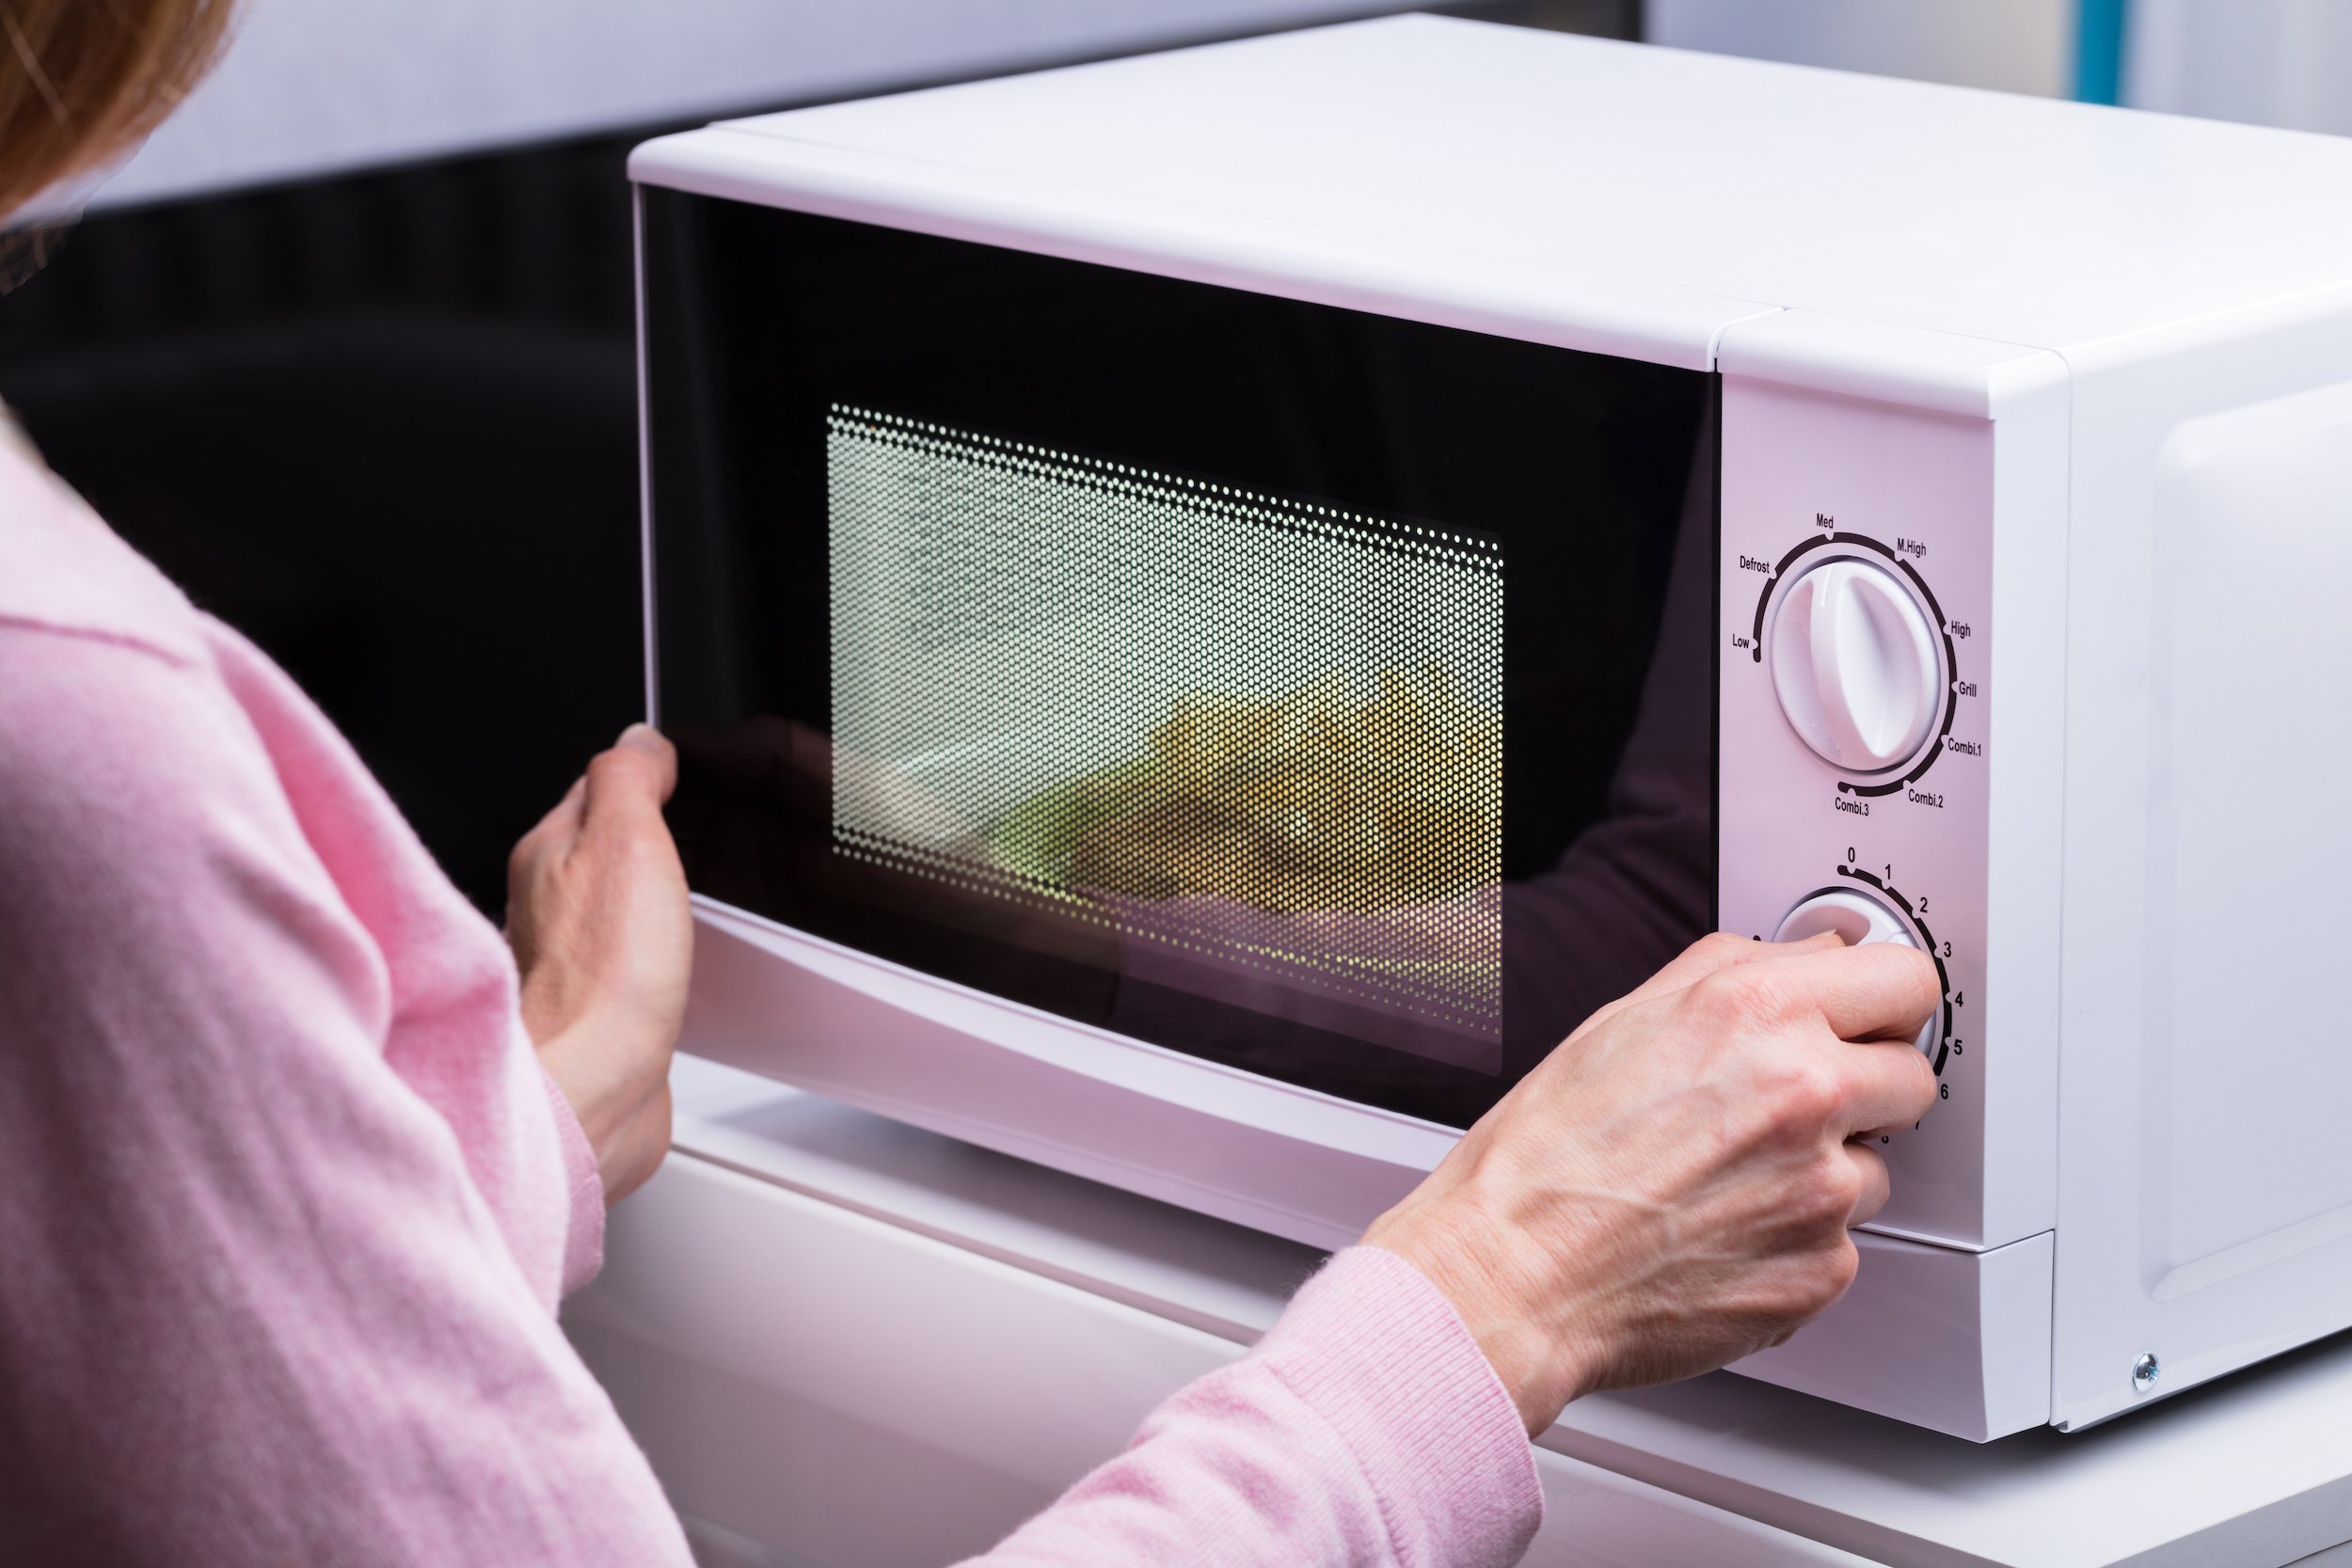 10 Best Mini Microwaves For Your Home or Office